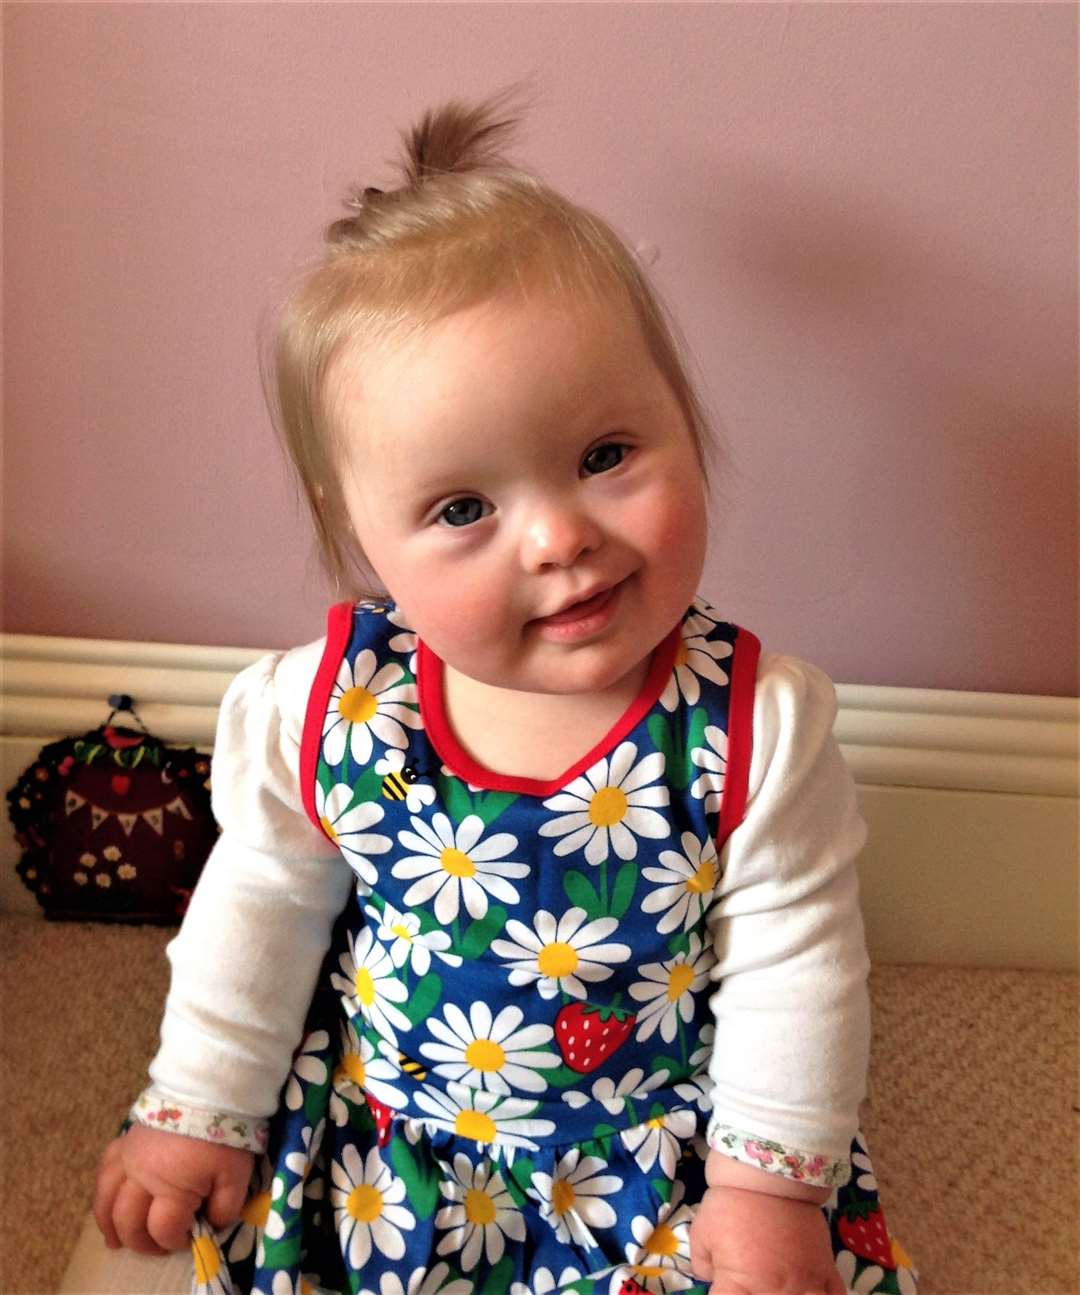 Scye's daughter Daisy was born with Down Syndrome last year.